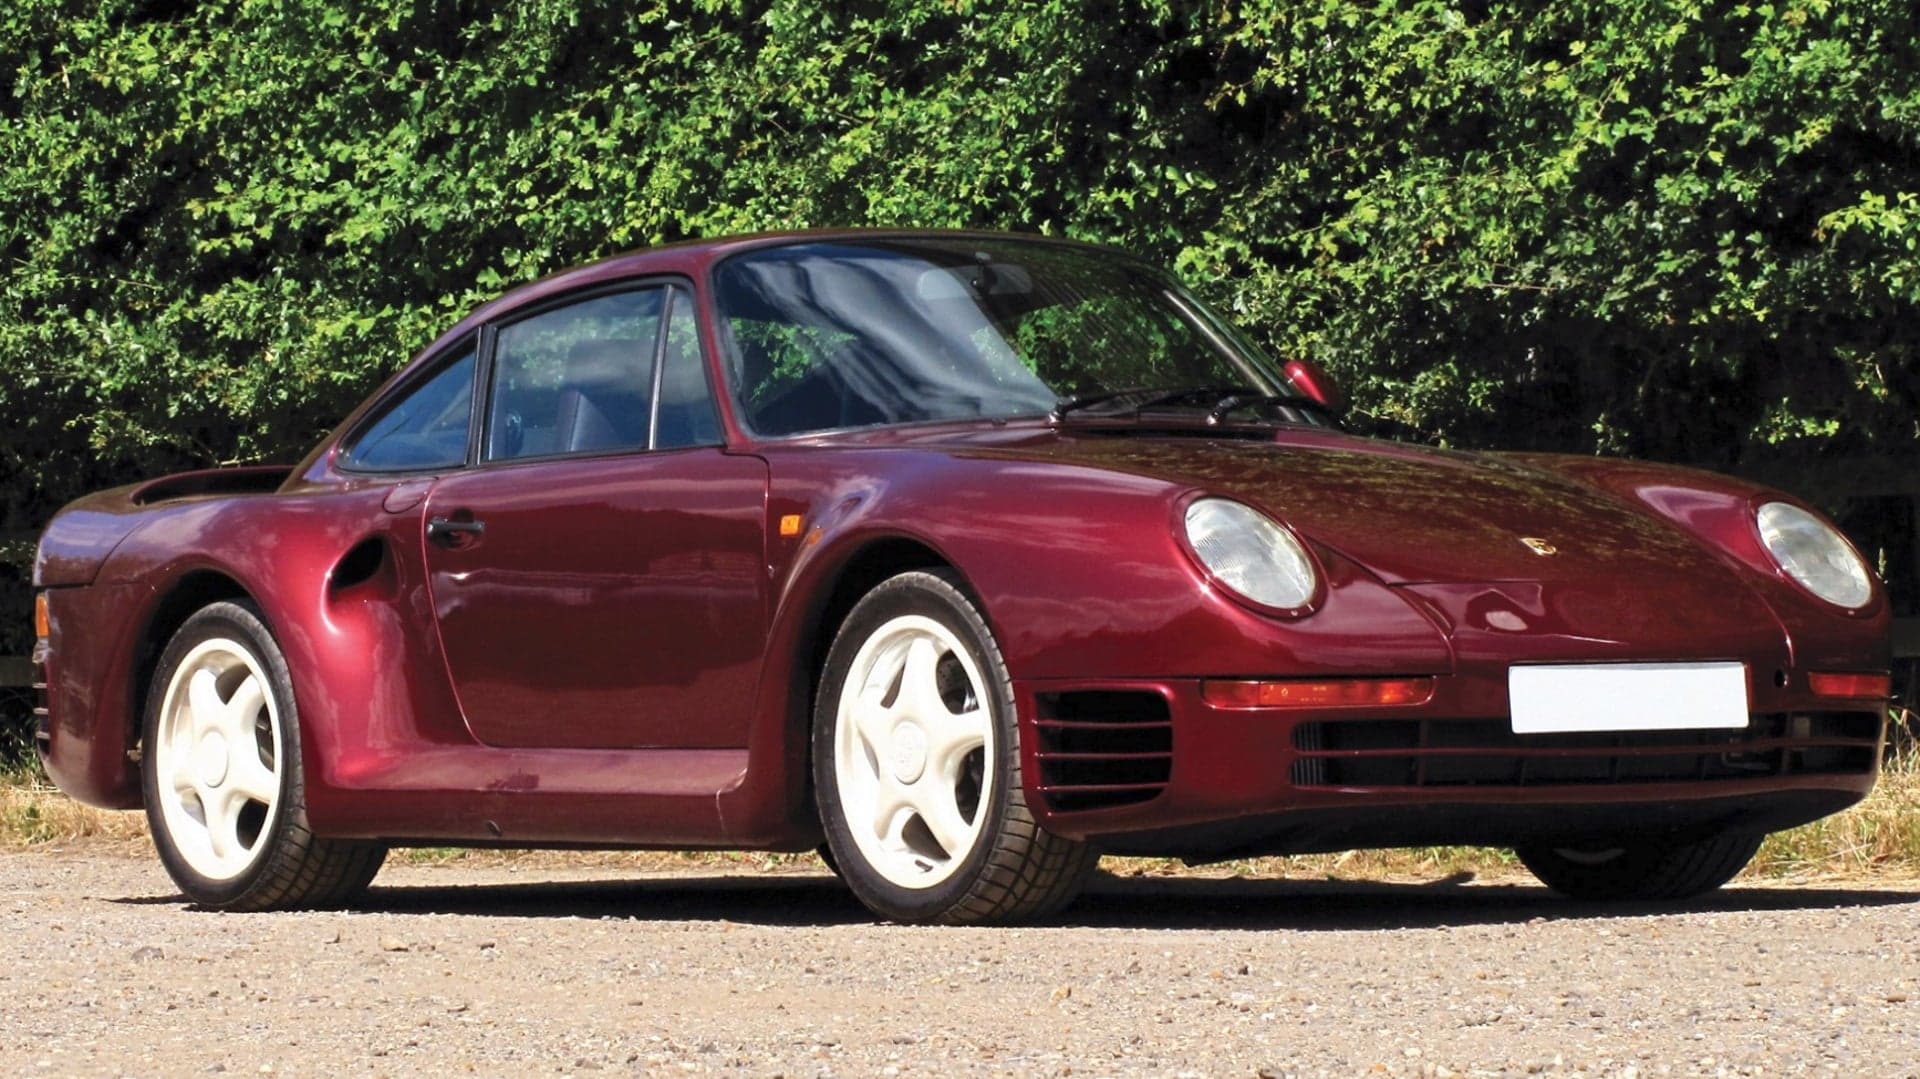 1985 Porsche 959 Prototype Expected to Go for Around $1.5 Million at Auction